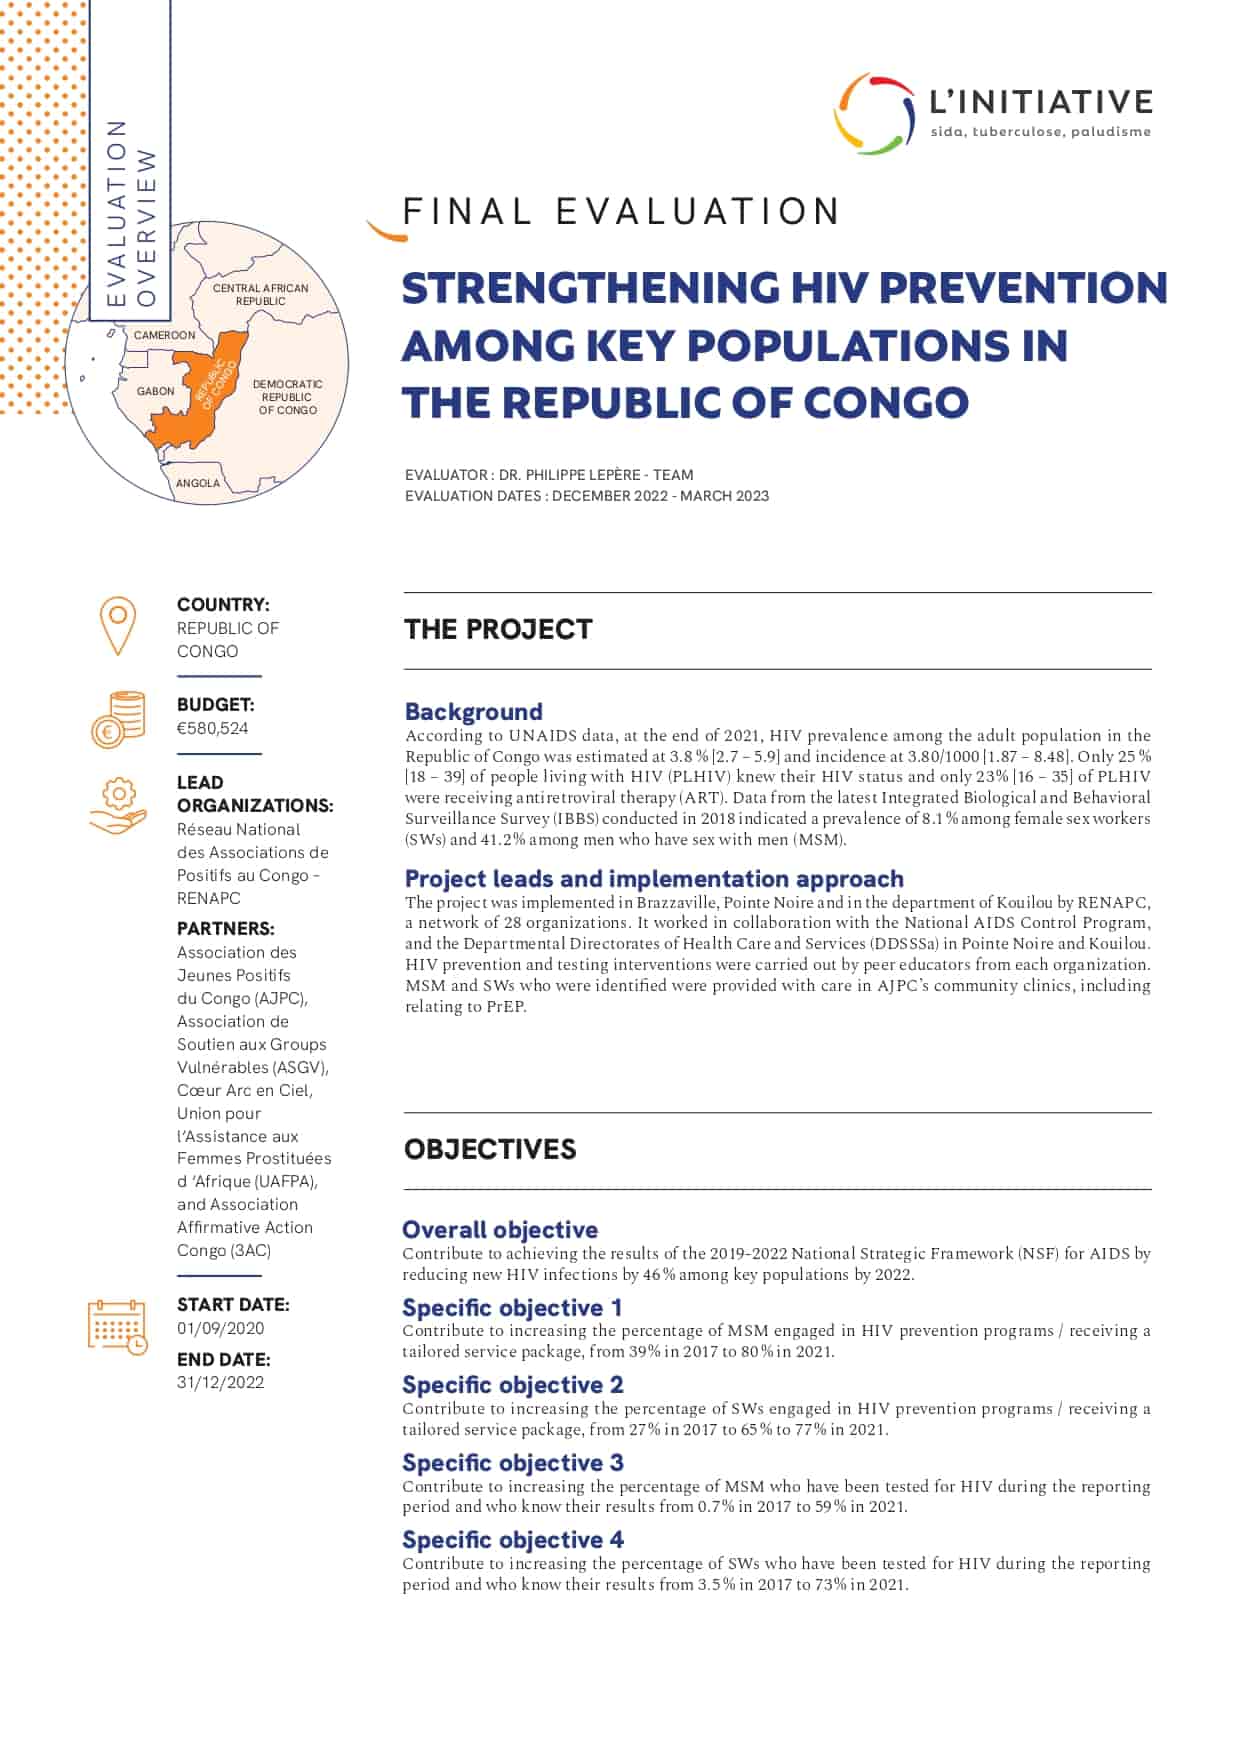 Evaluation overview – renapc – strengthening hiv prevention among key populations in the republic of congo